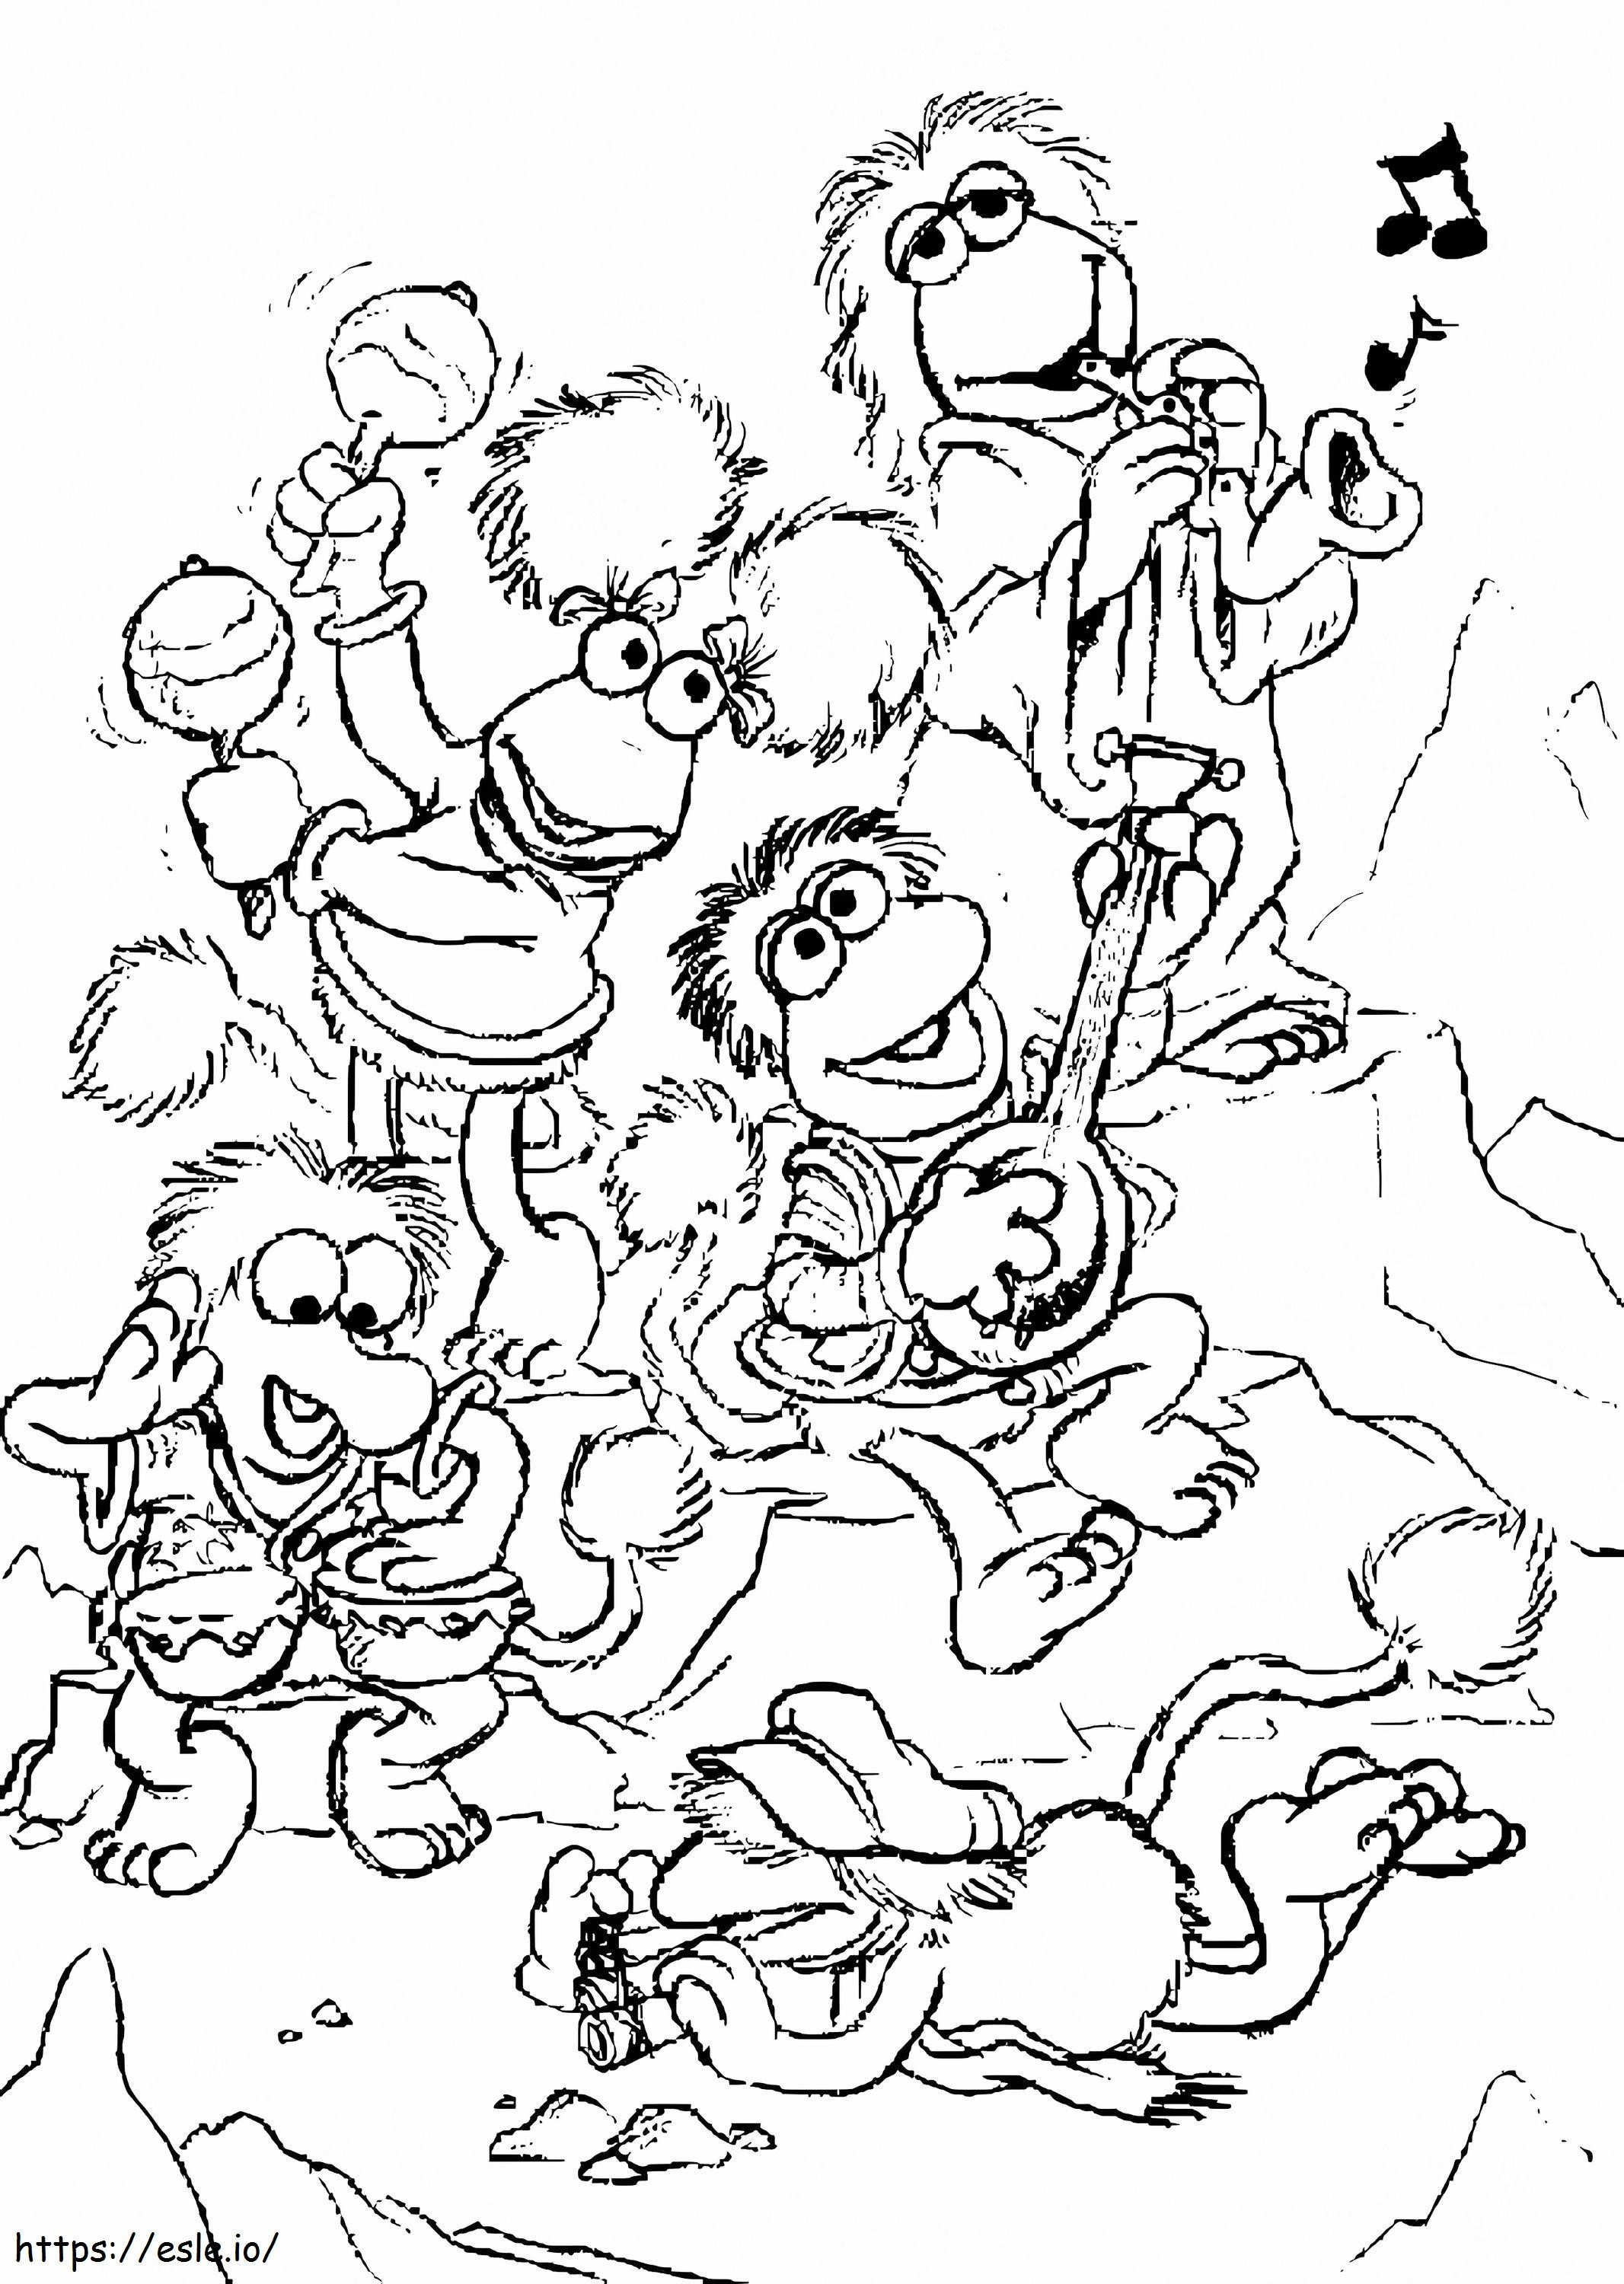 Fraggle Rock coloring page